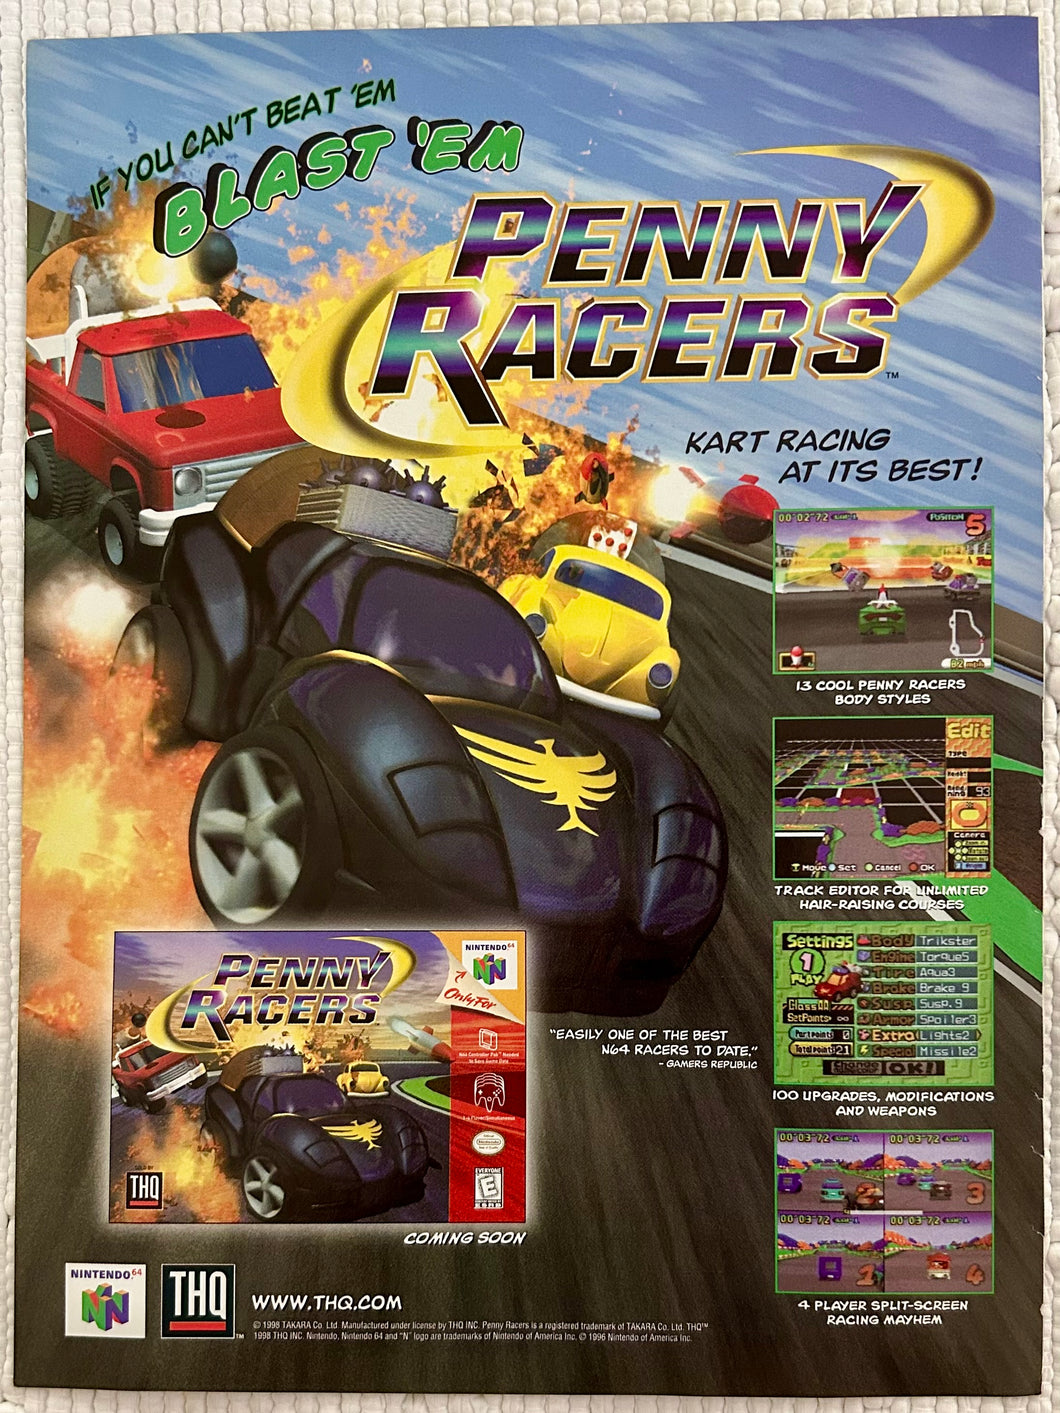 Penny Racers - N64 - Original Vintage Advertisement - Print Ads - Laminated A4 Poster